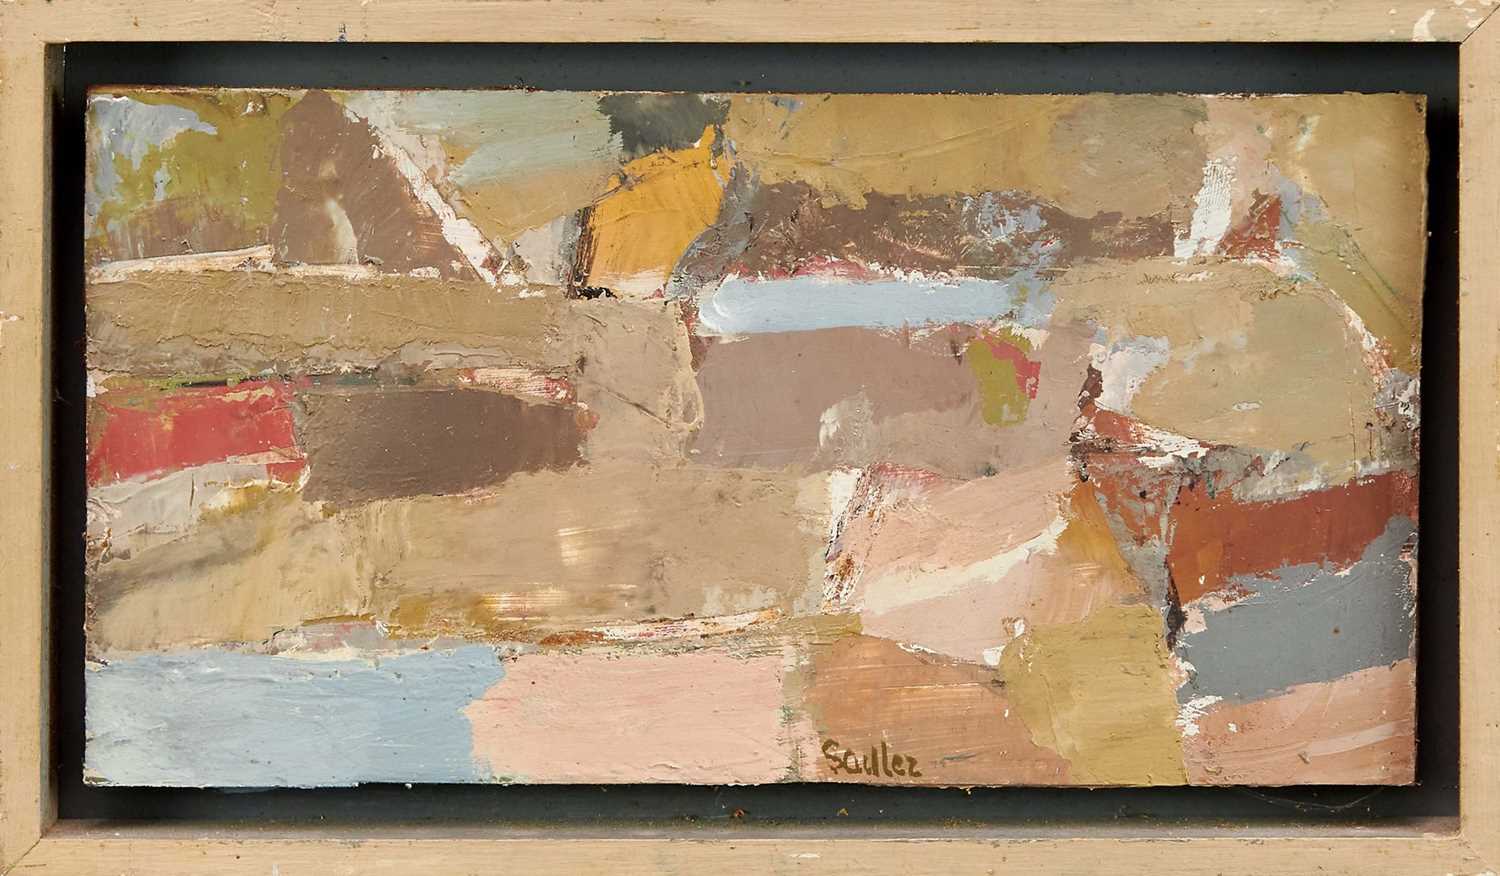 Lot 986 - *Robert Sadler (1909-2001) Abstract, "Composition March 1967", acrylic on board, signed, 14.5 x 27.5cm, framed